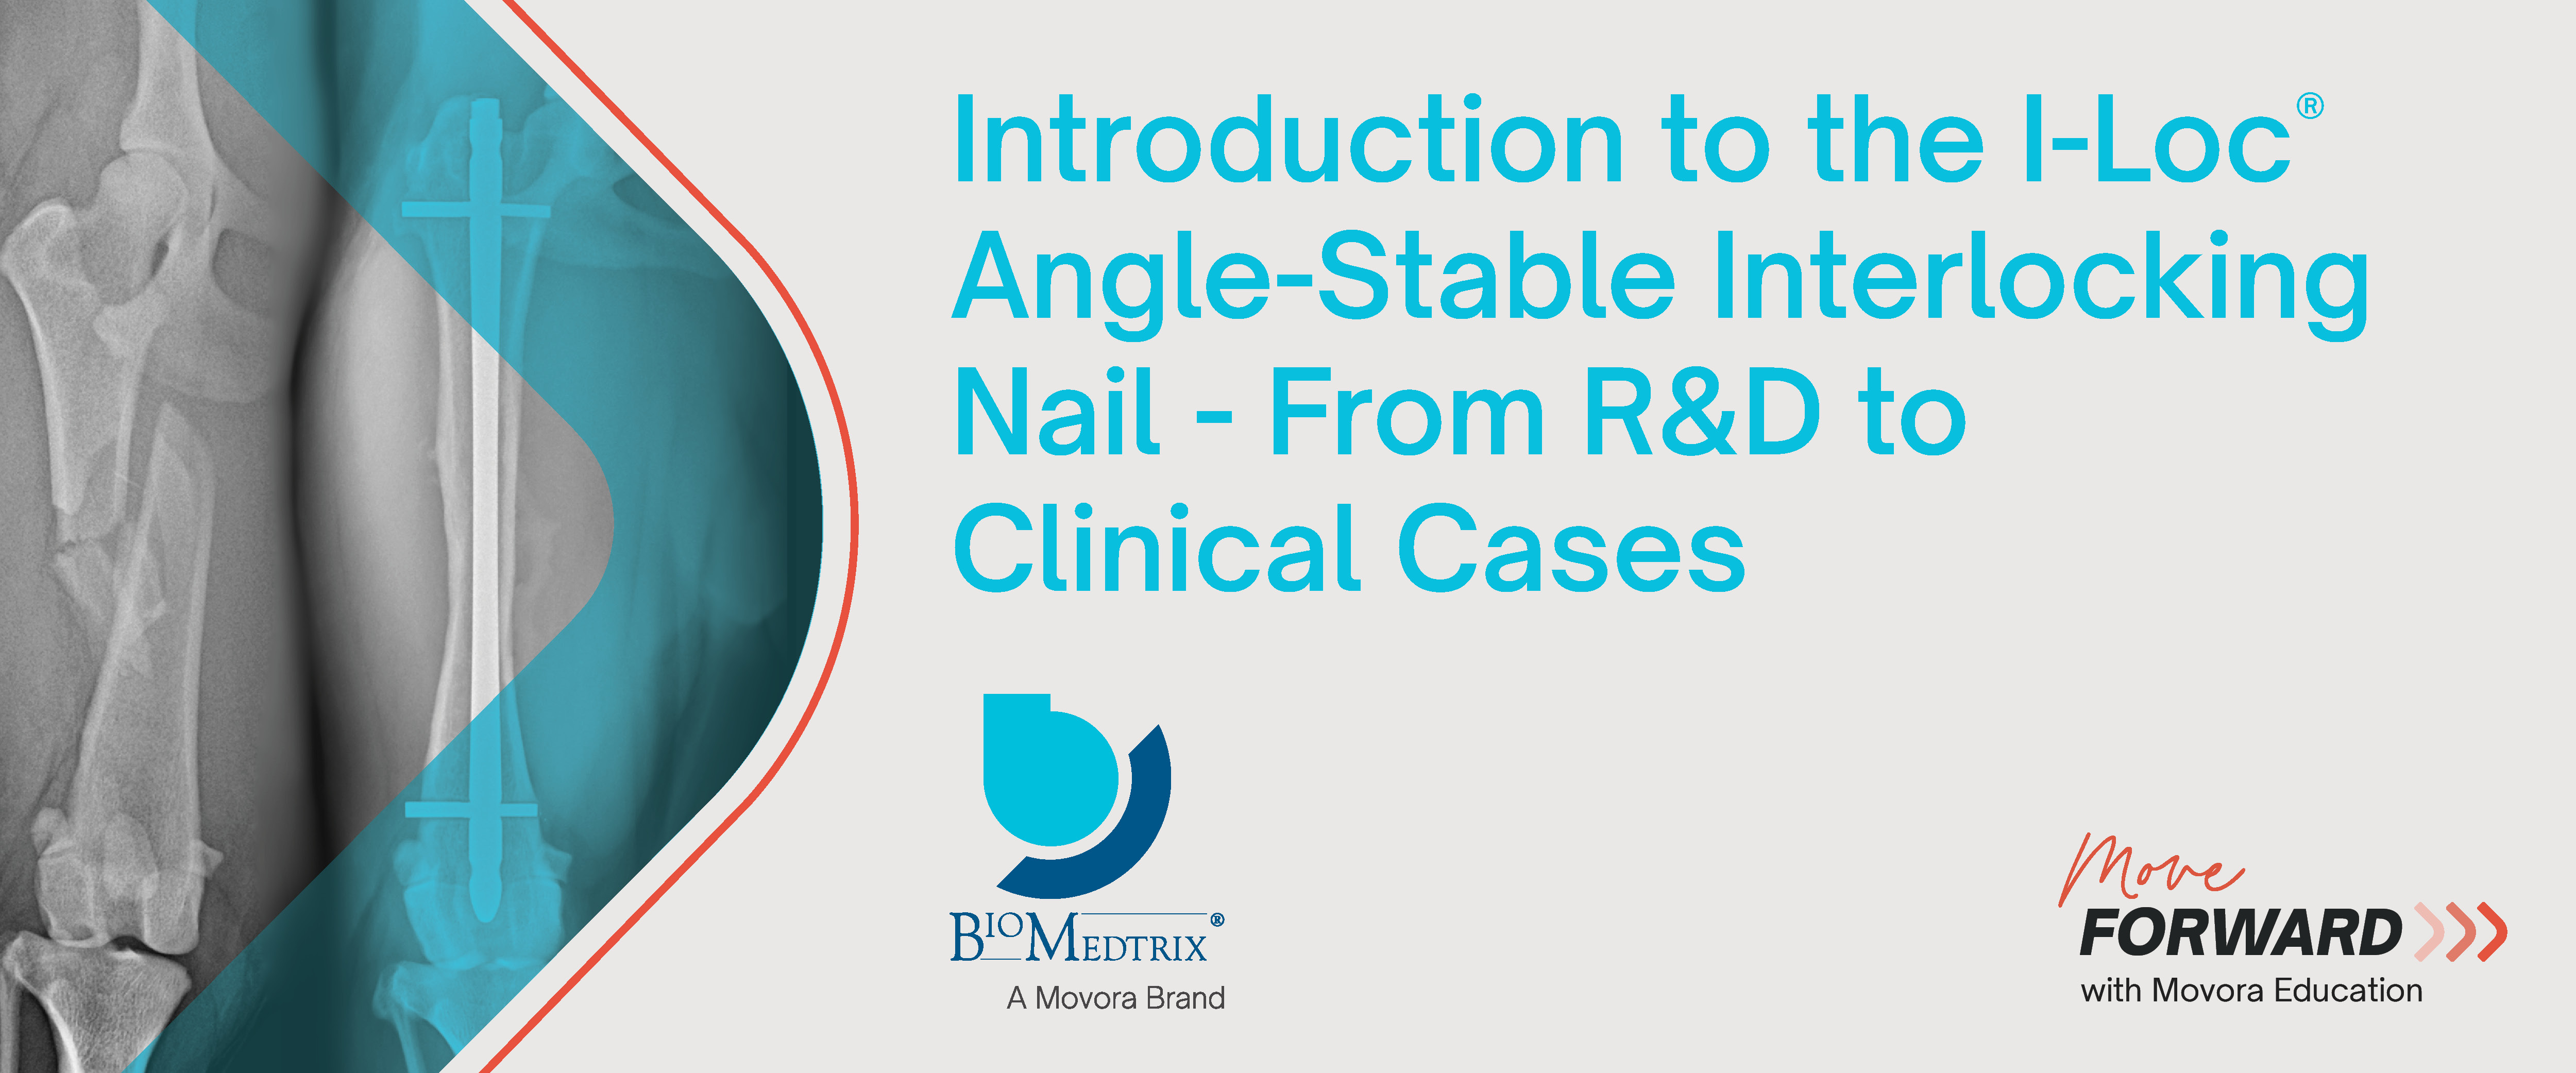 Introduction to the I-Loc Angle-Stable Interlocking nail - banner